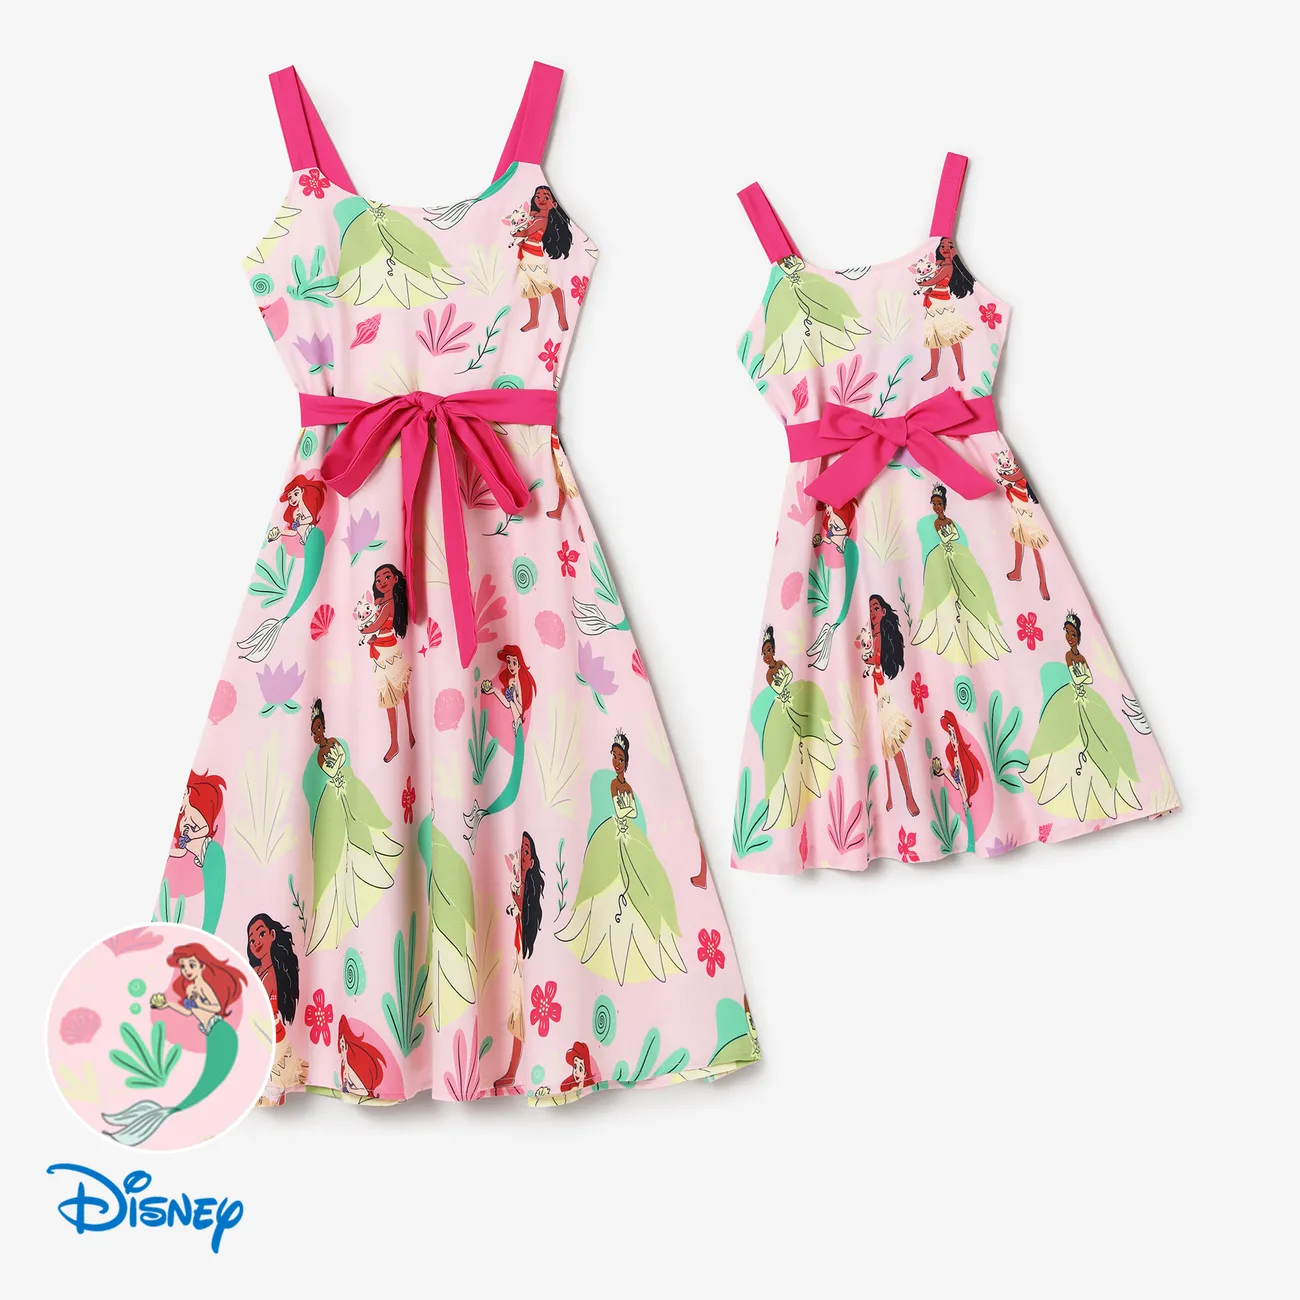 Disney Princess Mommy and Me Character and Floral Allover Print Dress Pink big image 1